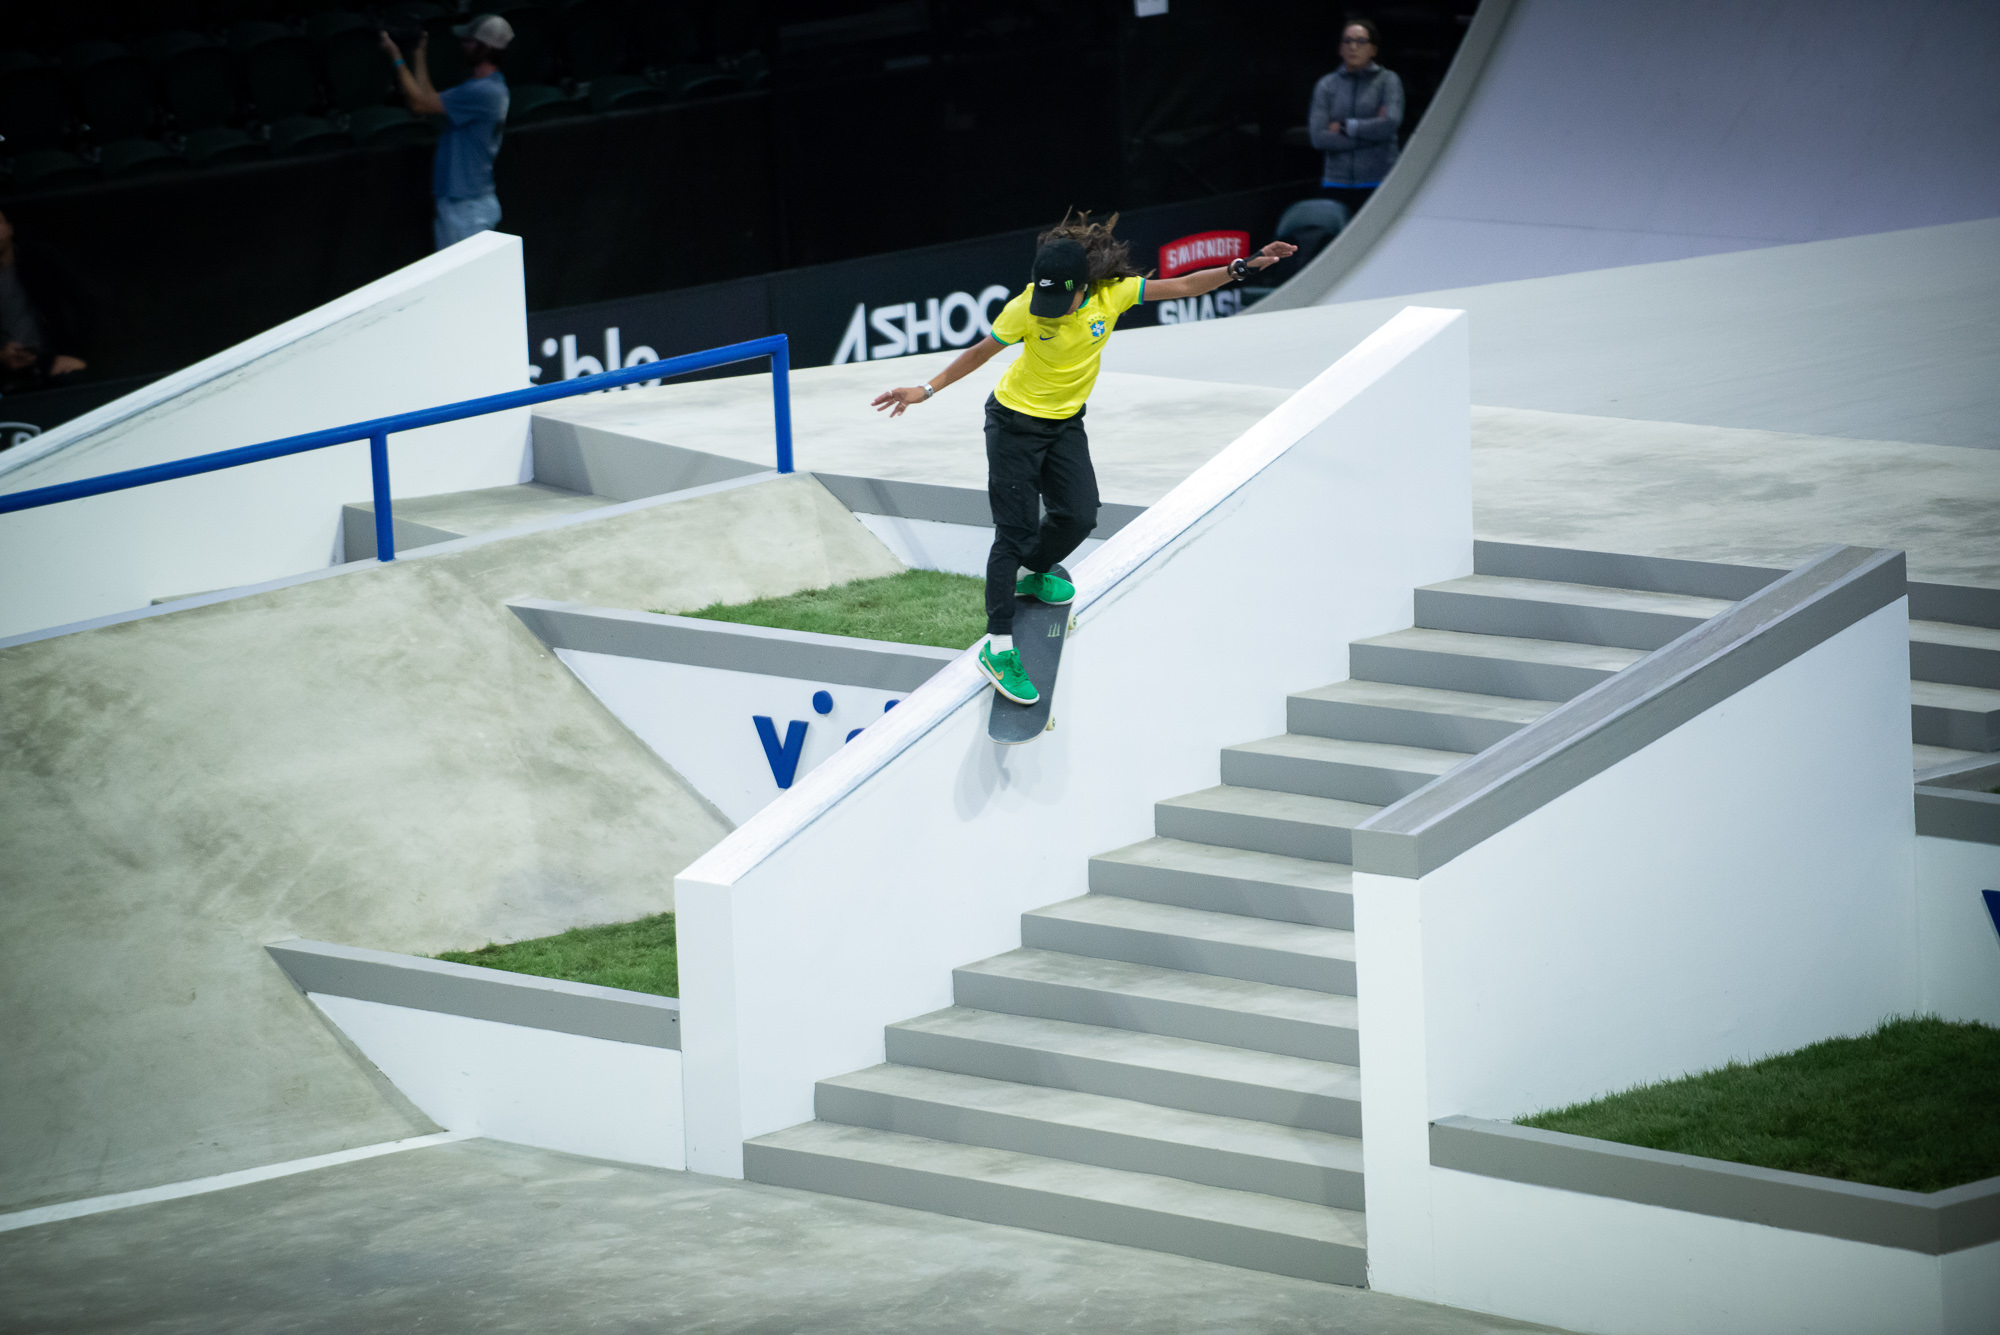 Monster Energy’s Rayssa Leal Takes First Place at SLS Seattle 2022 Skateboard Contest